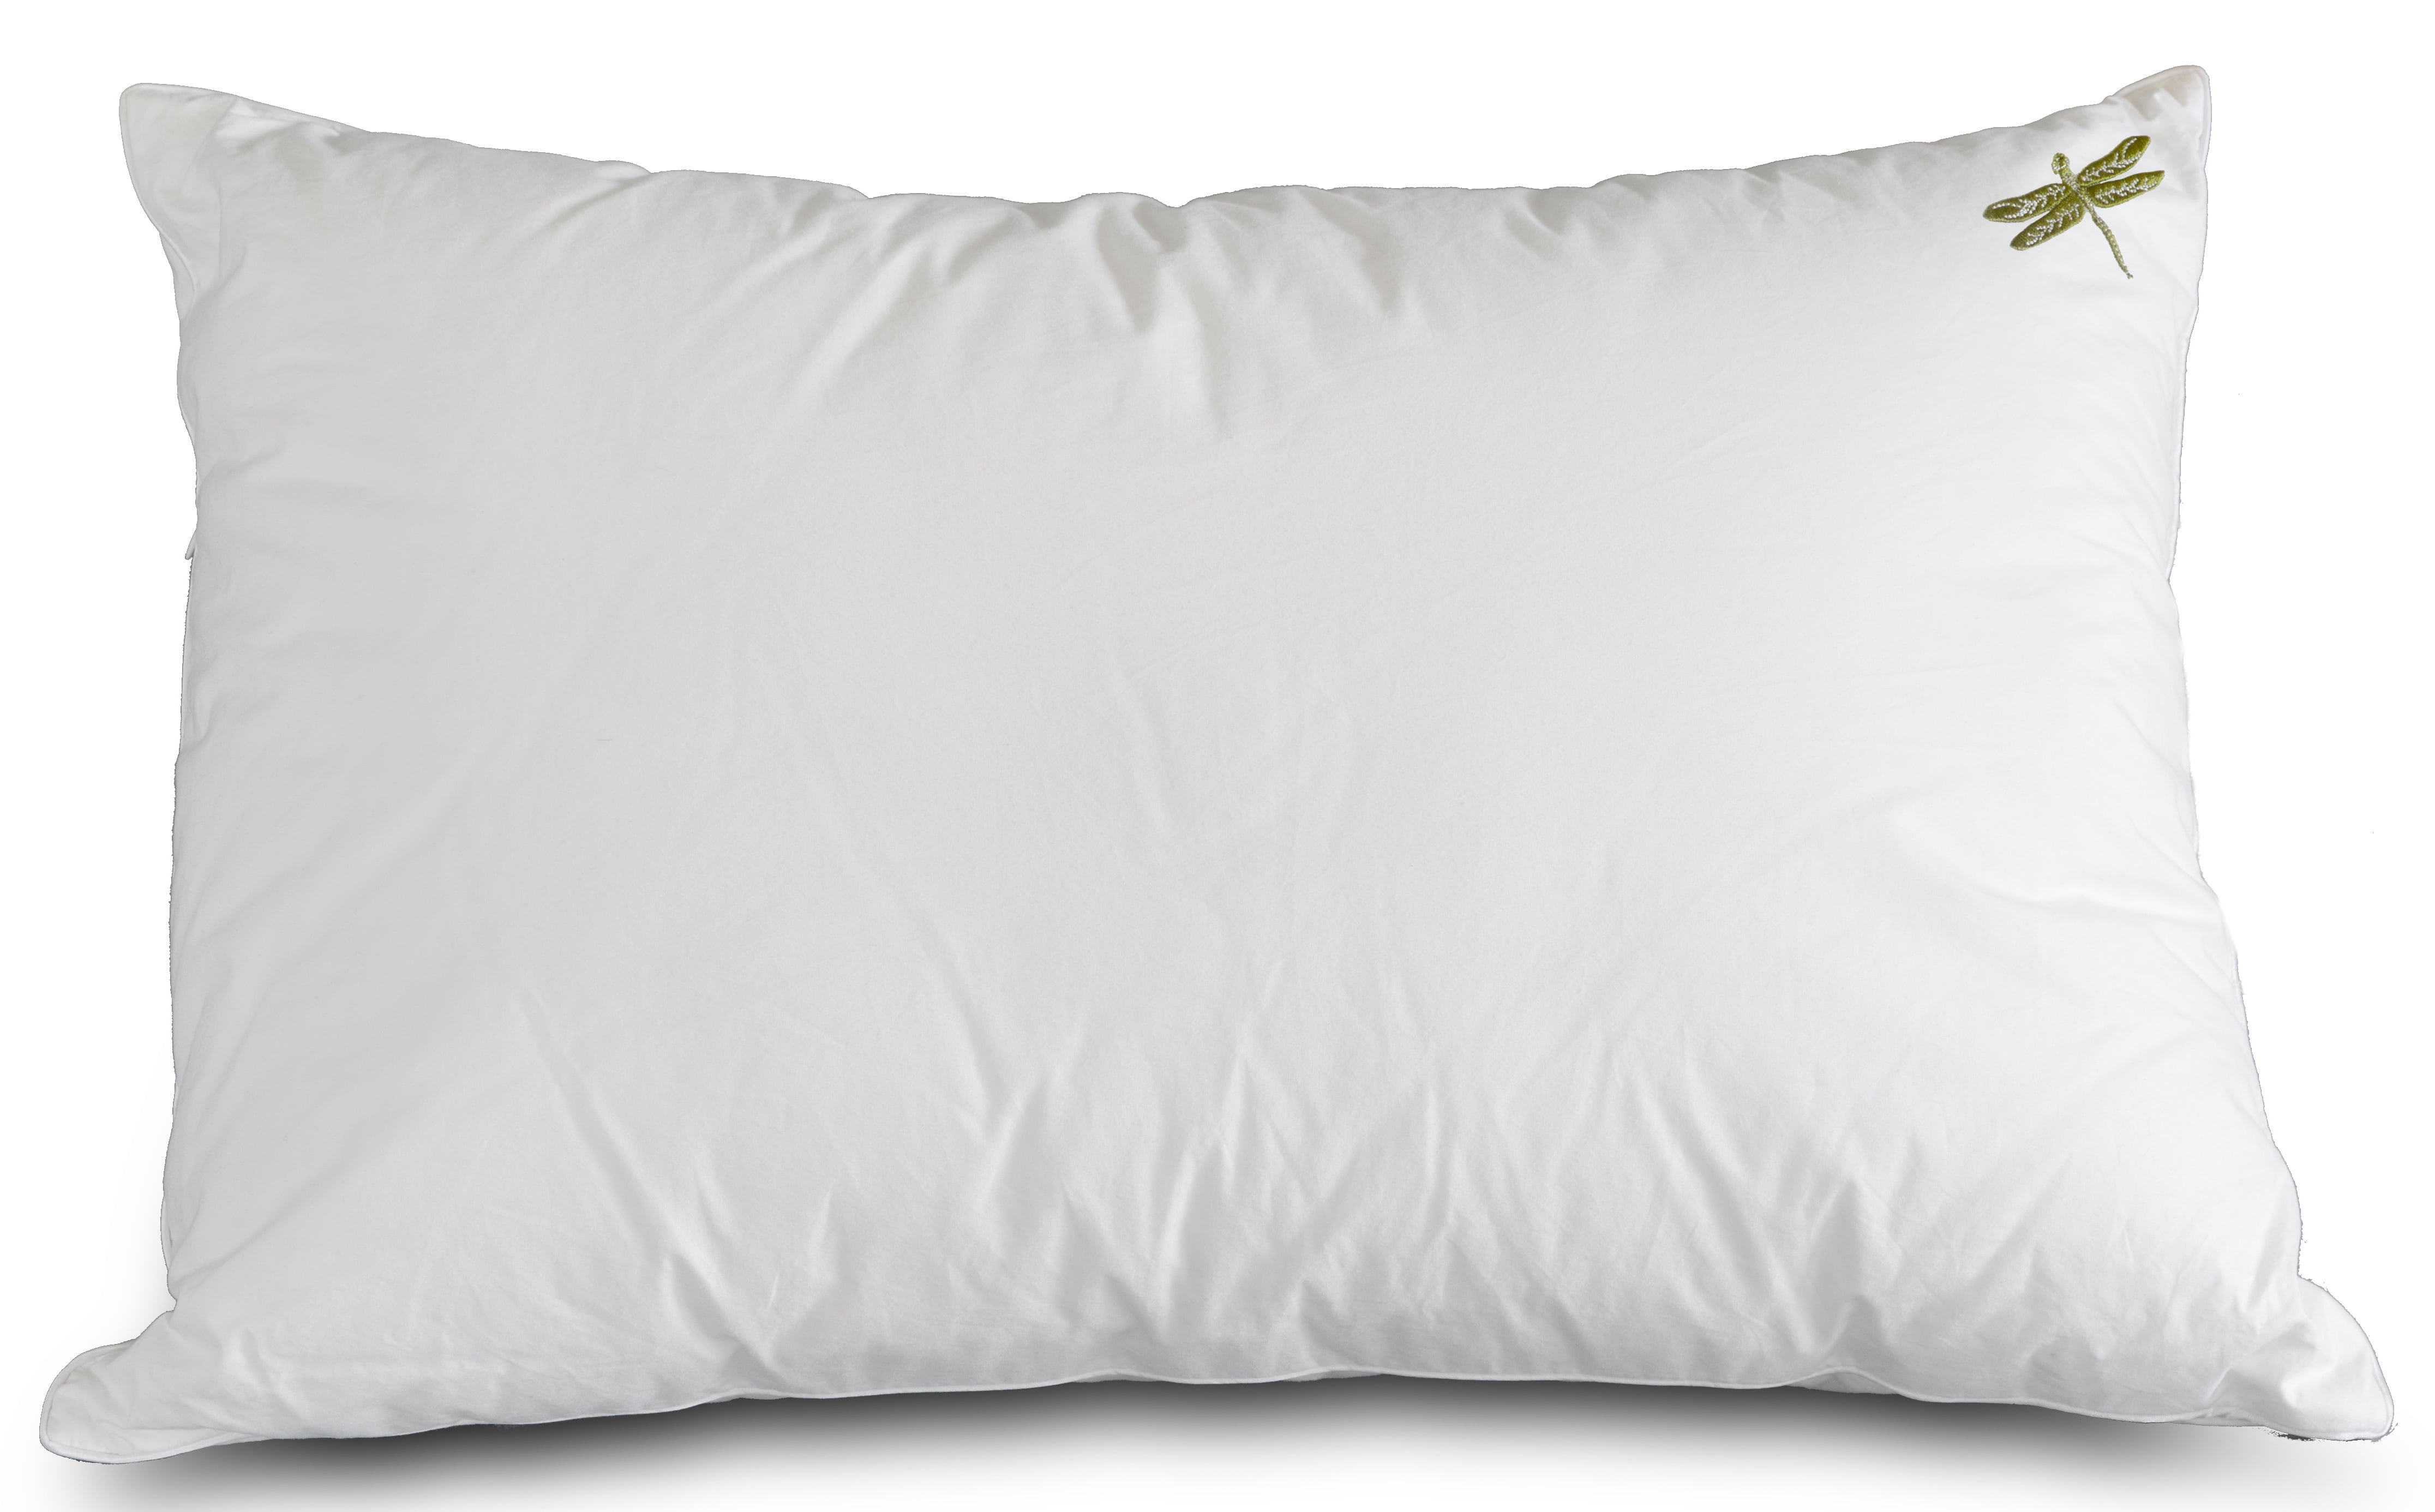 Firm Support Sound Pillow - Dreampad